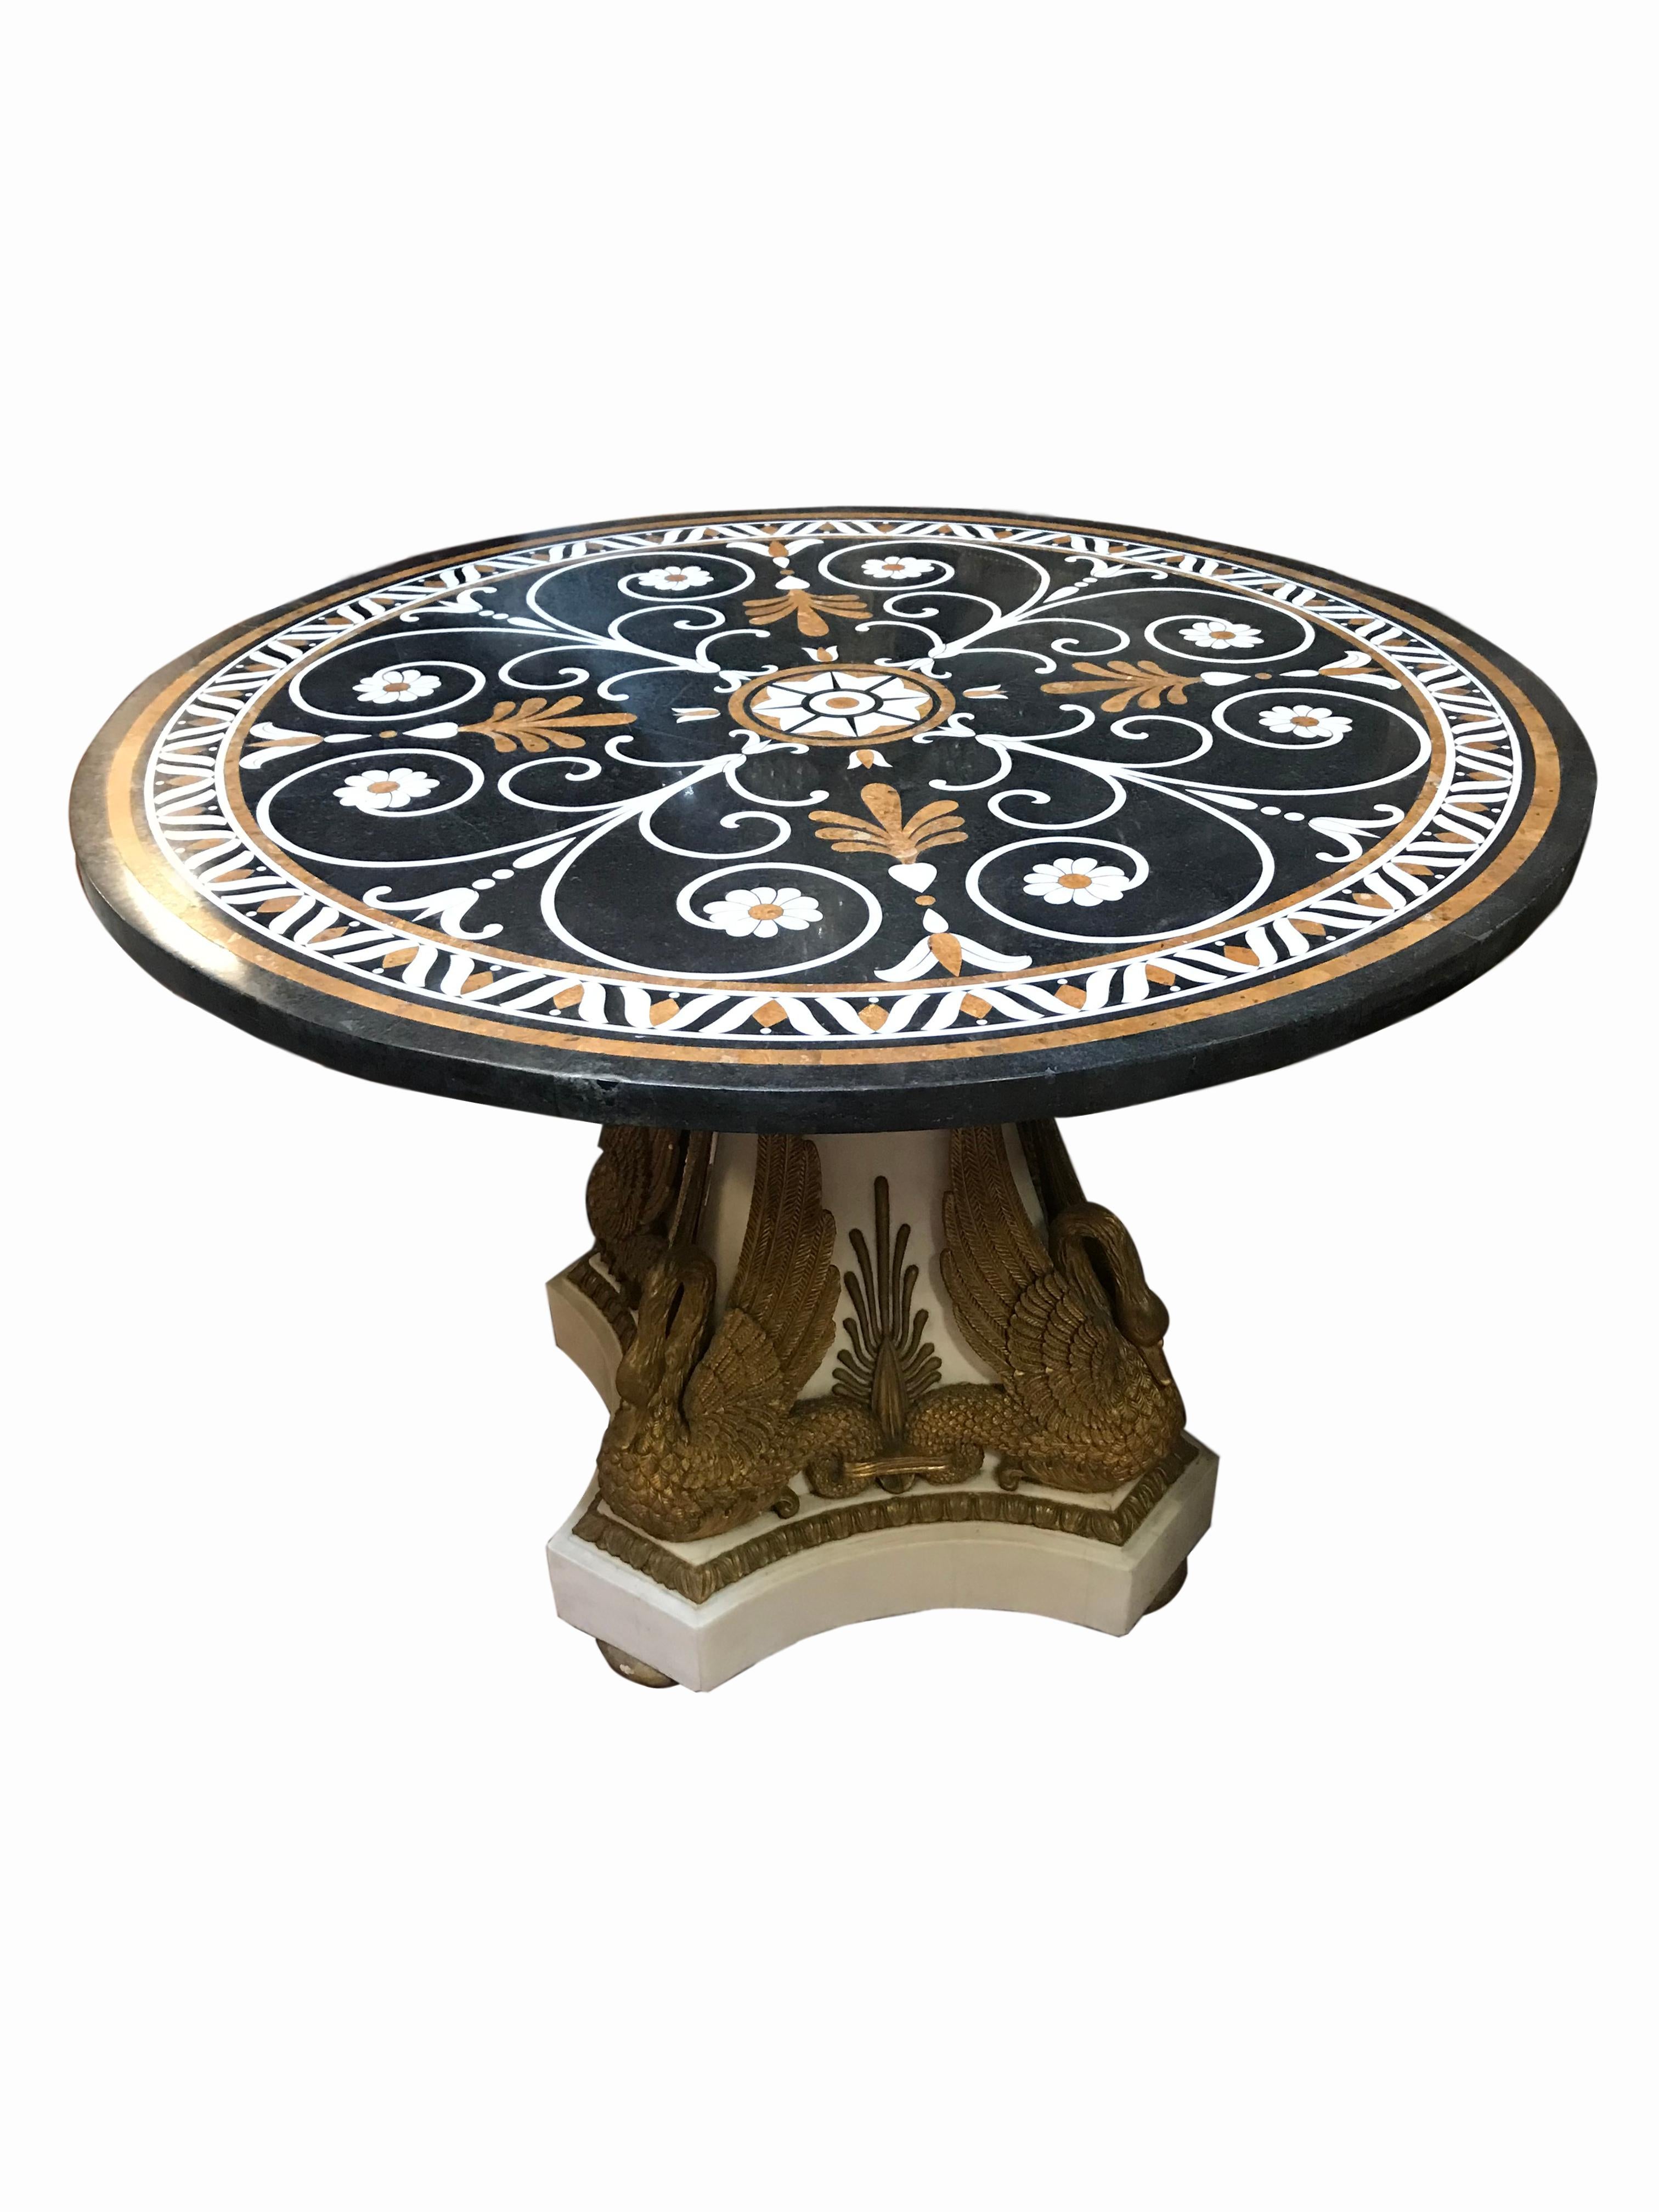 Carved Italian Neoclassical Style Marble Veneered Round Table